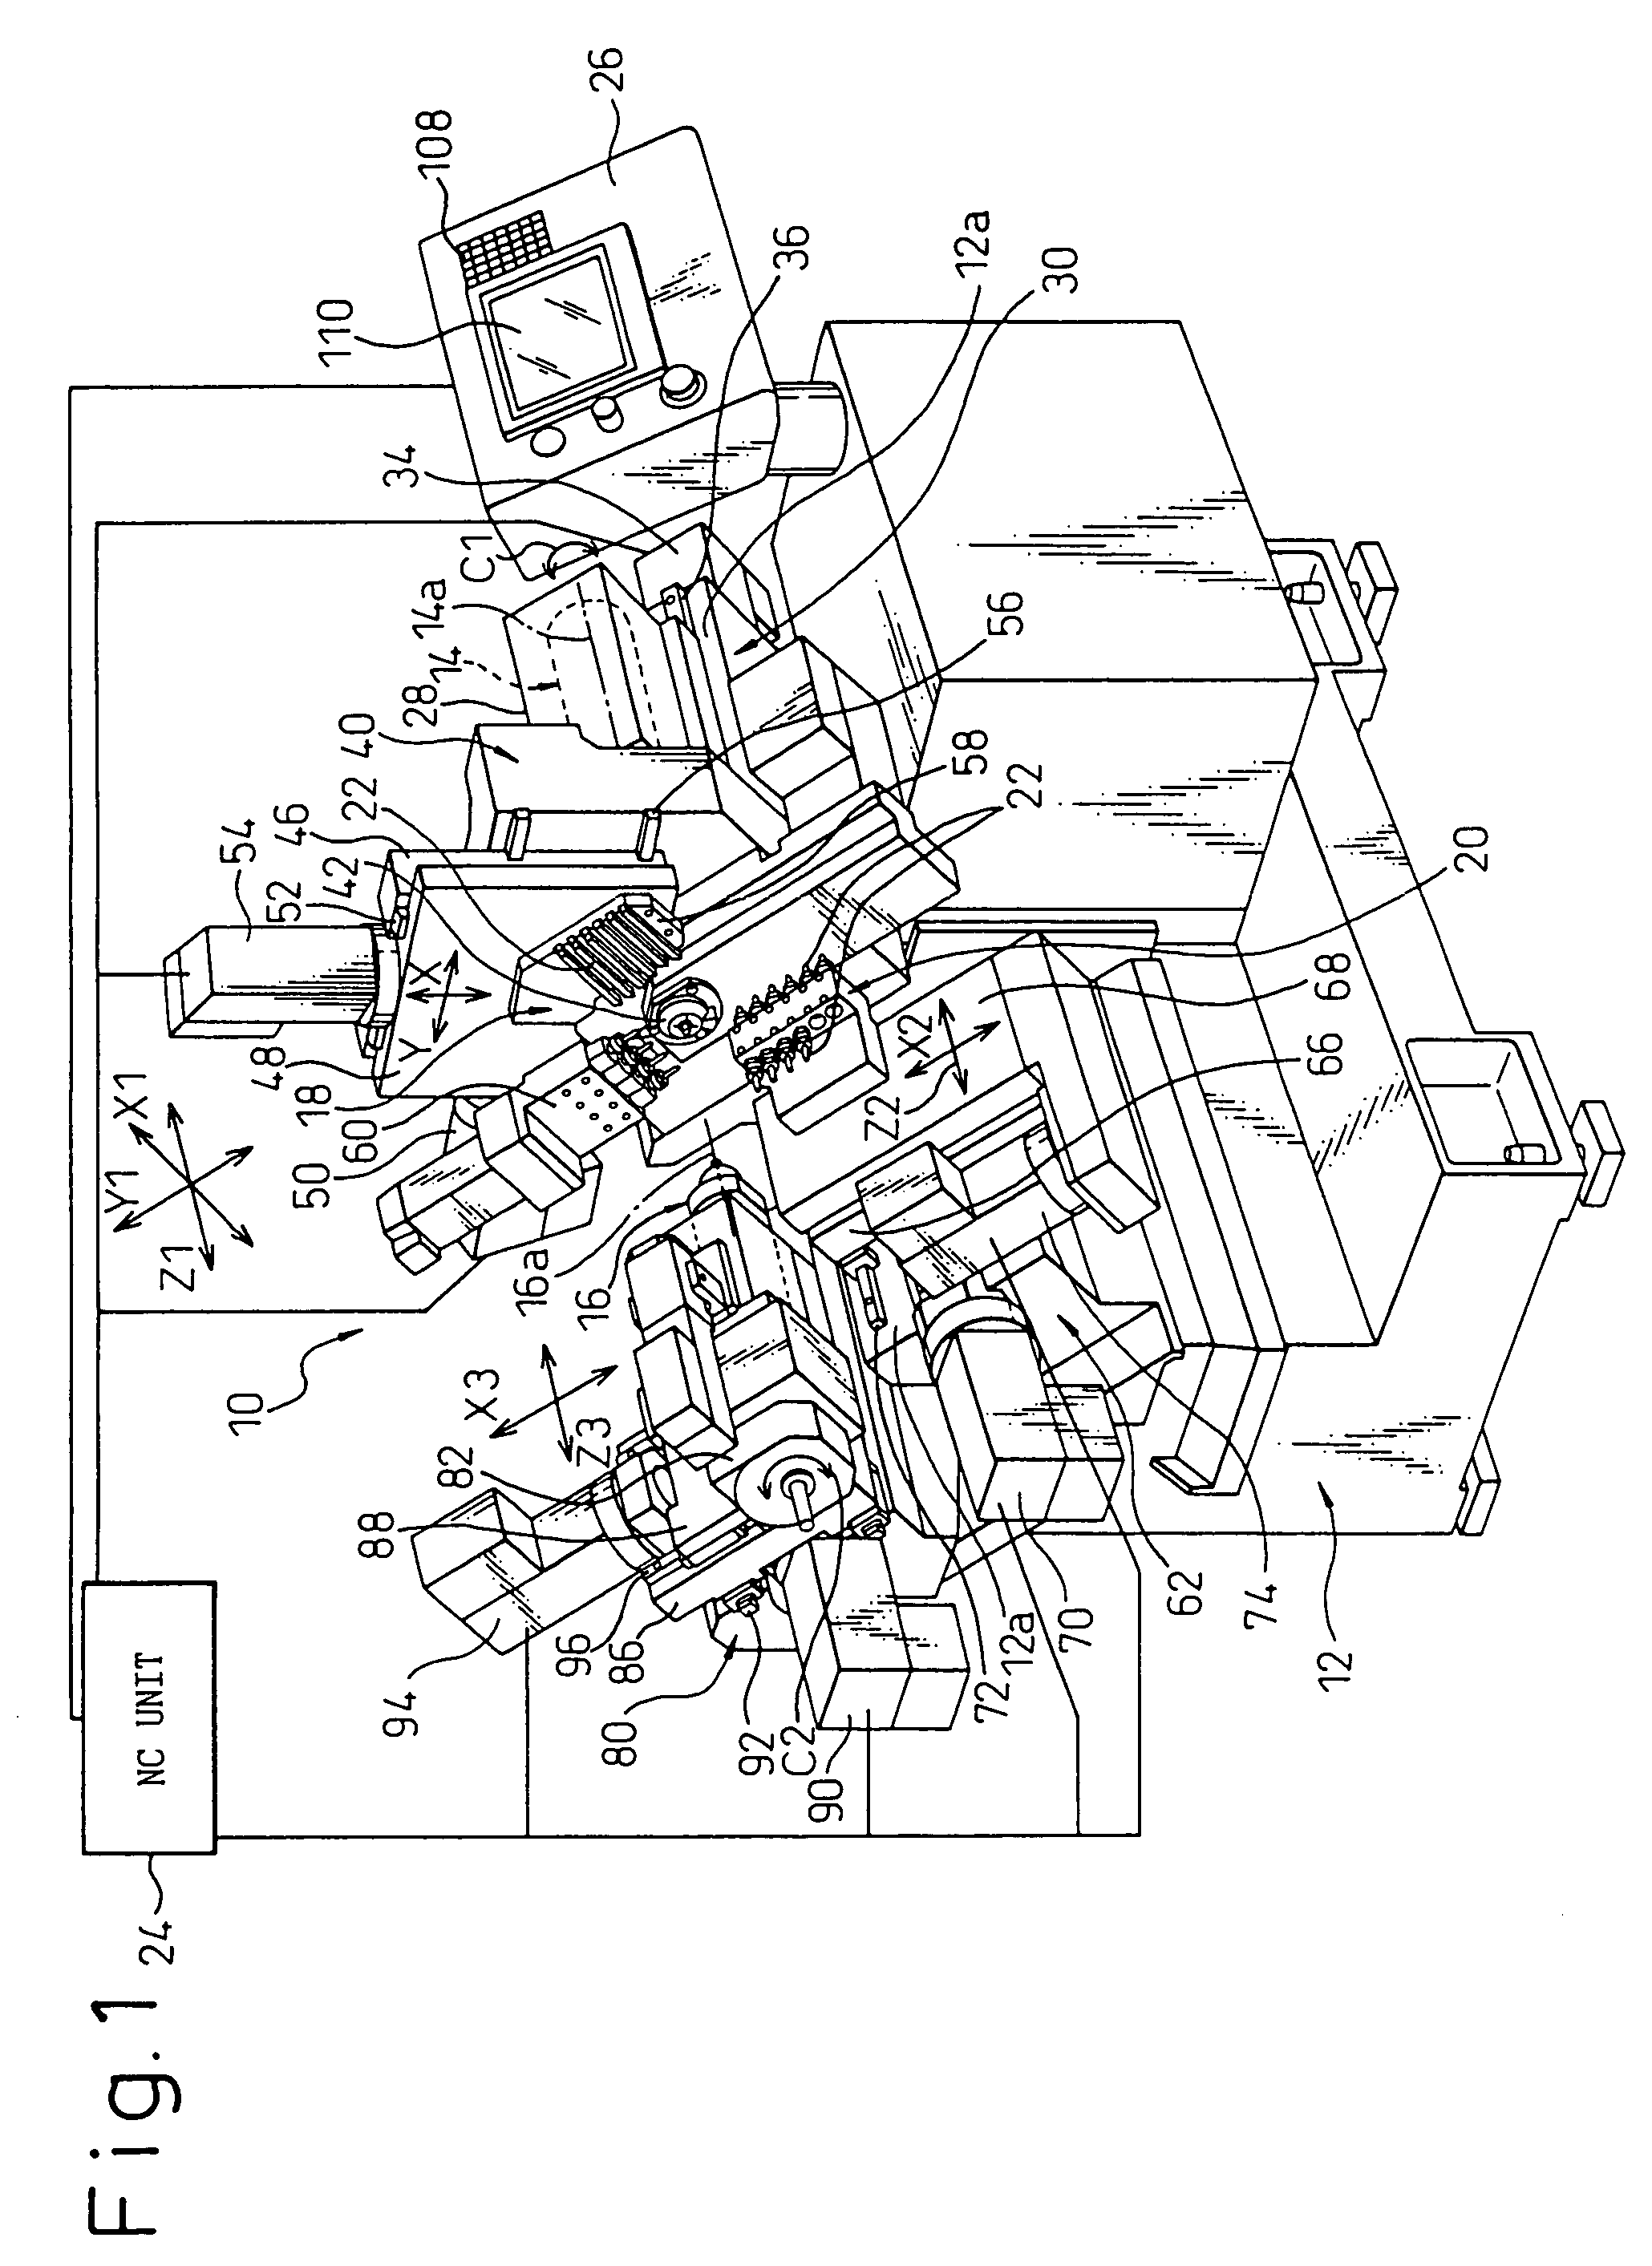 Numeric control lathe and method for controlling the same